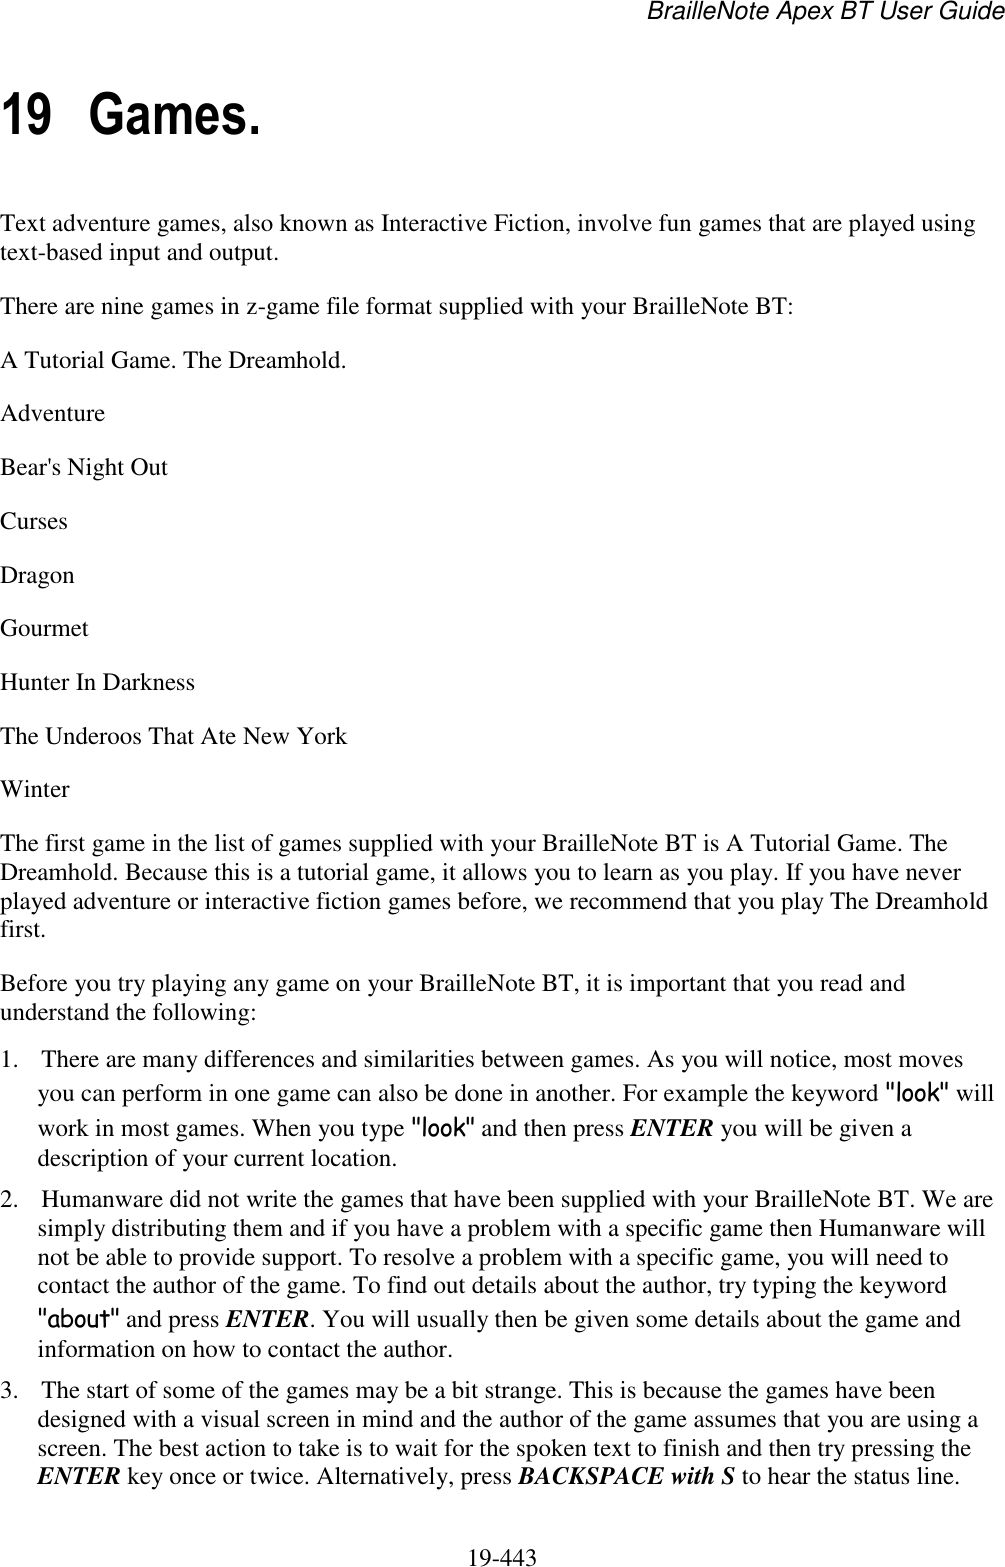 BrailleNote Apex BT User Guide   19-443   19 Games. Text adventure games, also known as Interactive Fiction, involve fun games that are played using text-based input and output. There are nine games in z-game file format supplied with your BrailleNote BT: A Tutorial Game. The Dreamhold. Adventure Bear&apos;s Night Out Curses Dragon Gourmet Hunter In Darkness The Underoos That Ate New York Winter The first game in the list of games supplied with your BrailleNote BT is A Tutorial Game. The Dreamhold. Because this is a tutorial game, it allows you to learn as you play. If you have never played adventure or interactive fiction games before, we recommend that you play The Dreamhold first.  Before you try playing any game on your BrailleNote BT, it is important that you read and understand the following: 1. There are many differences and similarities between games. As you will notice, most moves you can perform in one game can also be done in another. For example the keyword &quot;look&quot; will work in most games. When you type &quot;look&quot; and then press ENTER you will be given a description of your current location. 2. Humanware did not write the games that have been supplied with your BrailleNote BT. We are simply distributing them and if you have a problem with a specific game then Humanware will not be able to provide support. To resolve a problem with a specific game, you will need to contact the author of the game. To find out details about the author, try typing the keyword &quot;about&quot; and press ENTER. You will usually then be given some details about the game and information on how to contact the author. 3. The start of some of the games may be a bit strange. This is because the games have been designed with a visual screen in mind and the author of the game assumes that you are using a screen. The best action to take is to wait for the spoken text to finish and then try pressing the ENTER key once or twice. Alternatively, press BACKSPACE with S to hear the status line. 